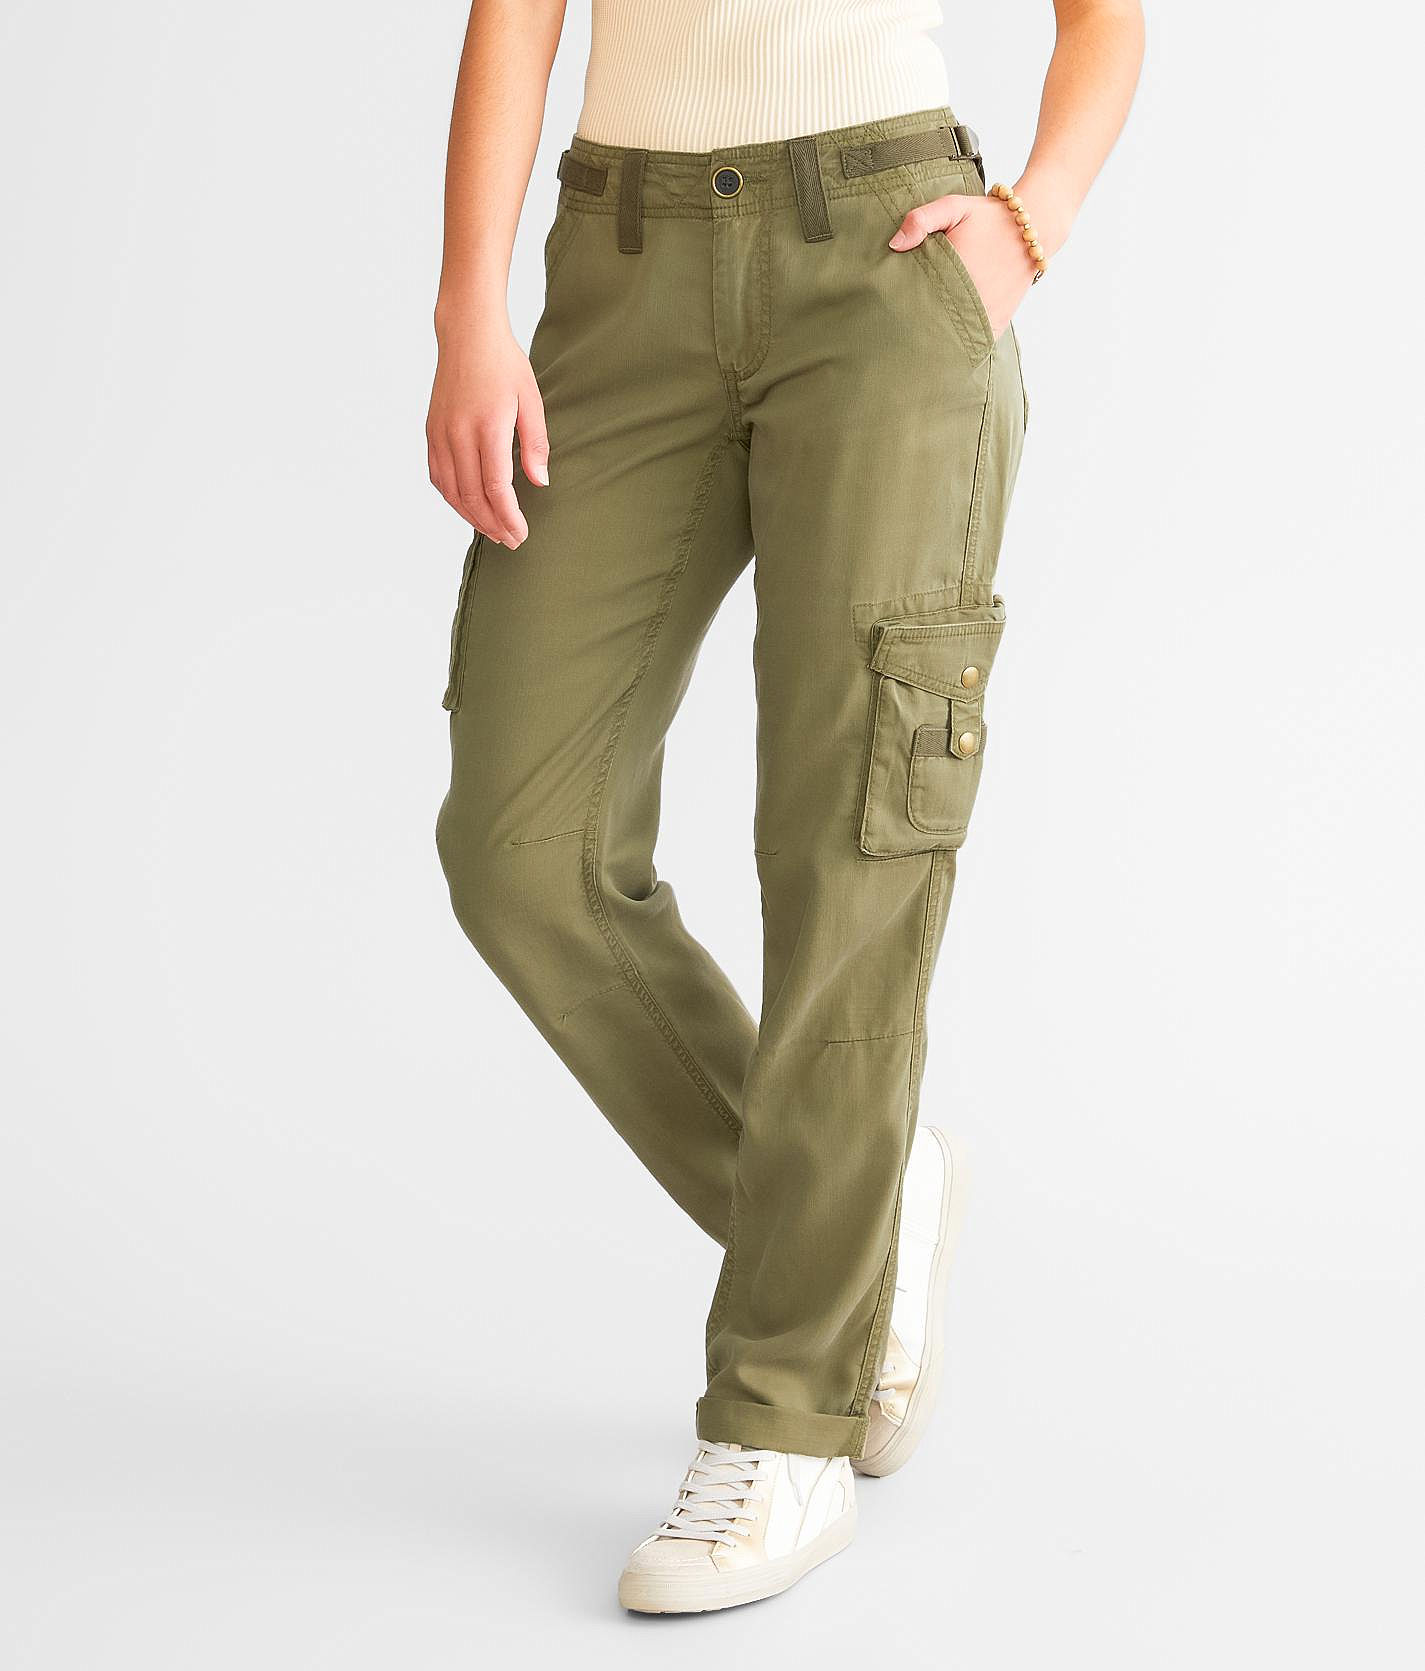 Hamilton Cargo Pants in Olive - FINAL SALE – Holley Girl